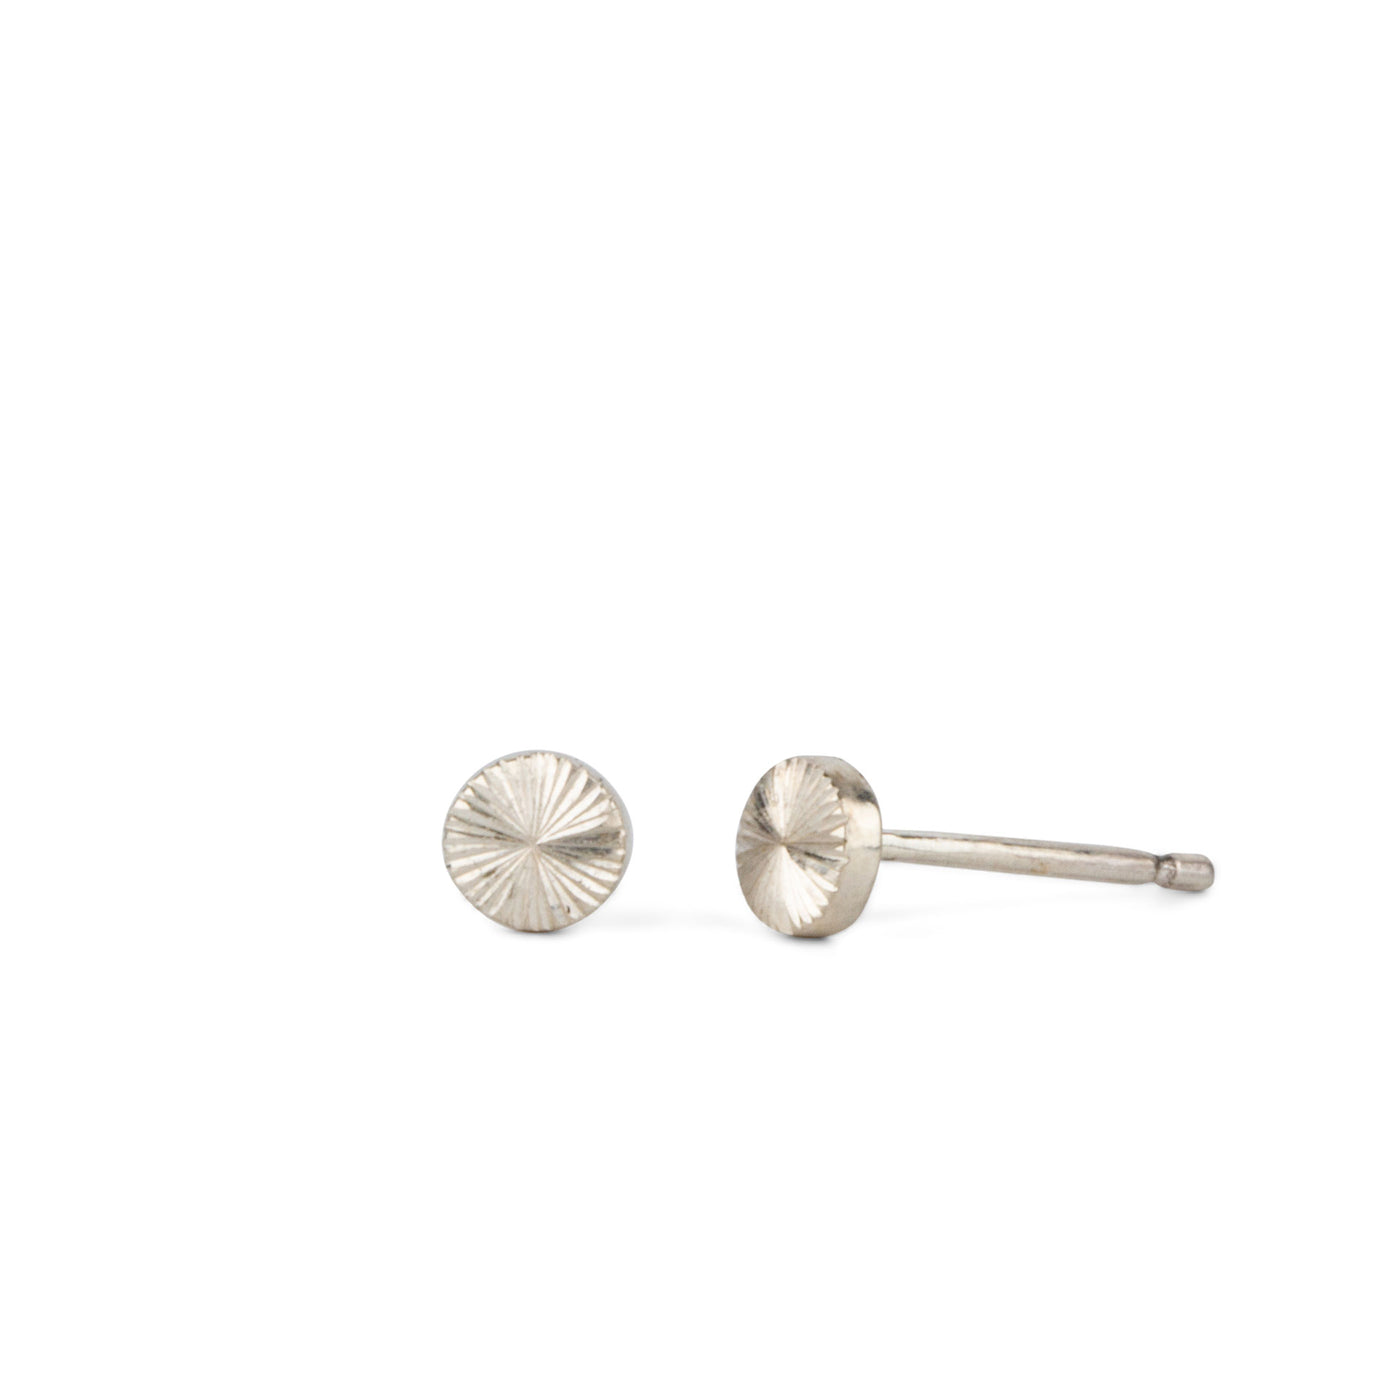 Tiny engraved silver stud earring by Corey Egan on a white background